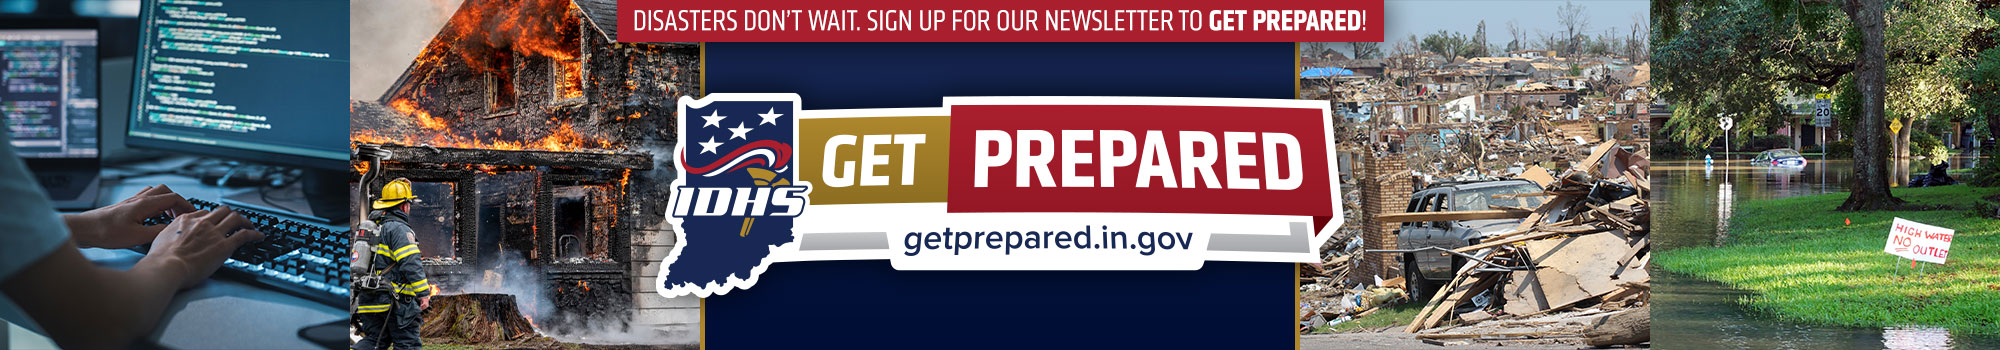 Get Prepared newsletter signup message with related disaster images